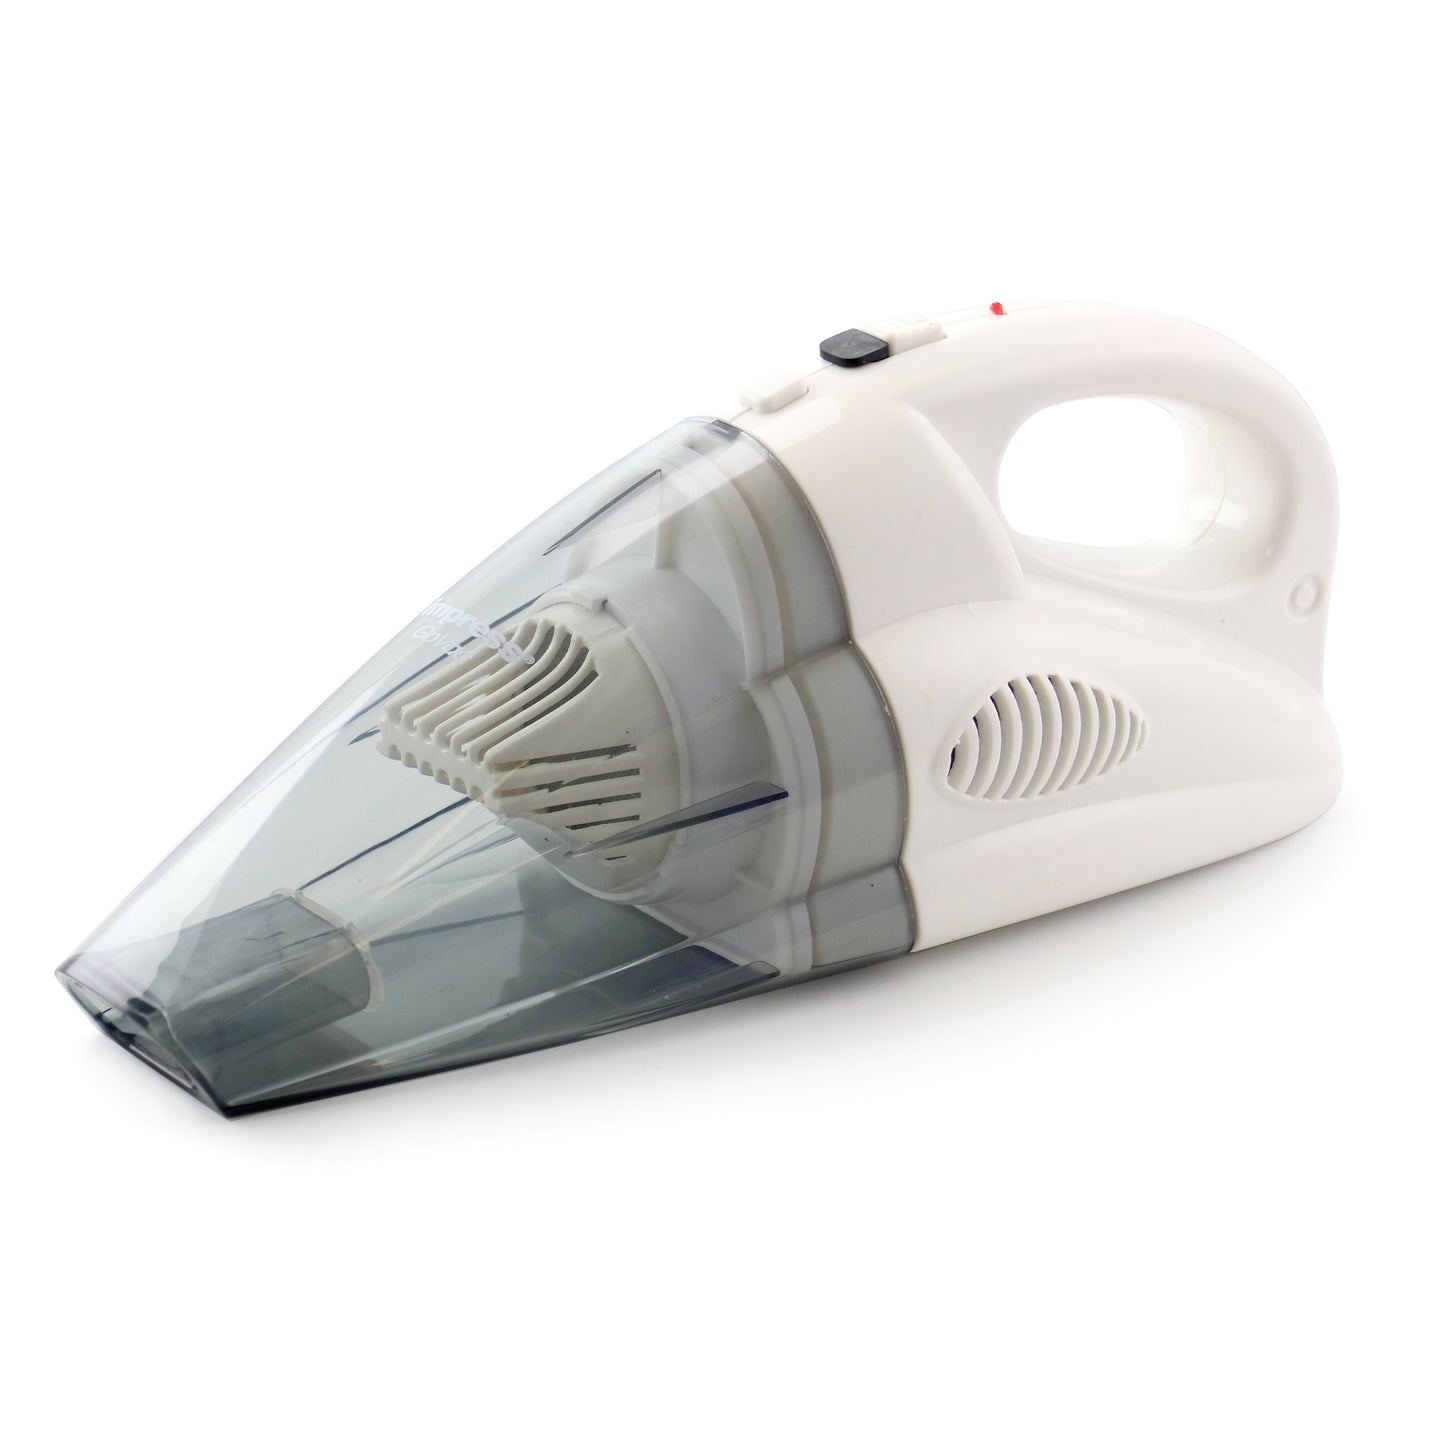 Impress GoVac Rechargeable Handheld Vacuum Cleaner- White